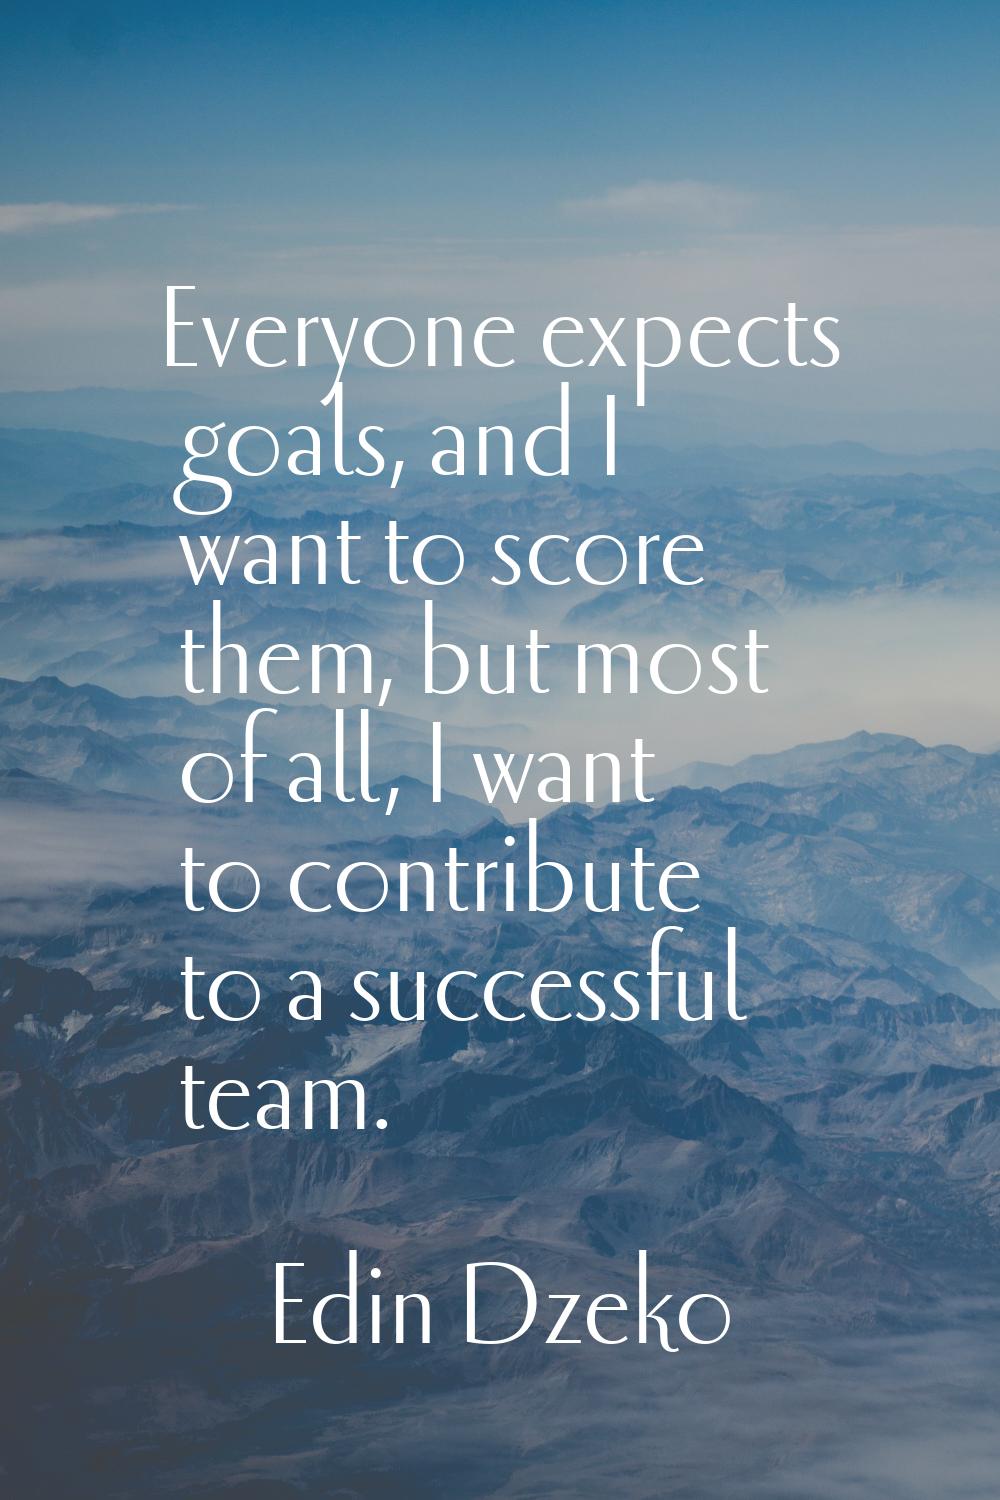 Everyone expects goals, and I want to score them, but most of all, I want to contribute to a succes